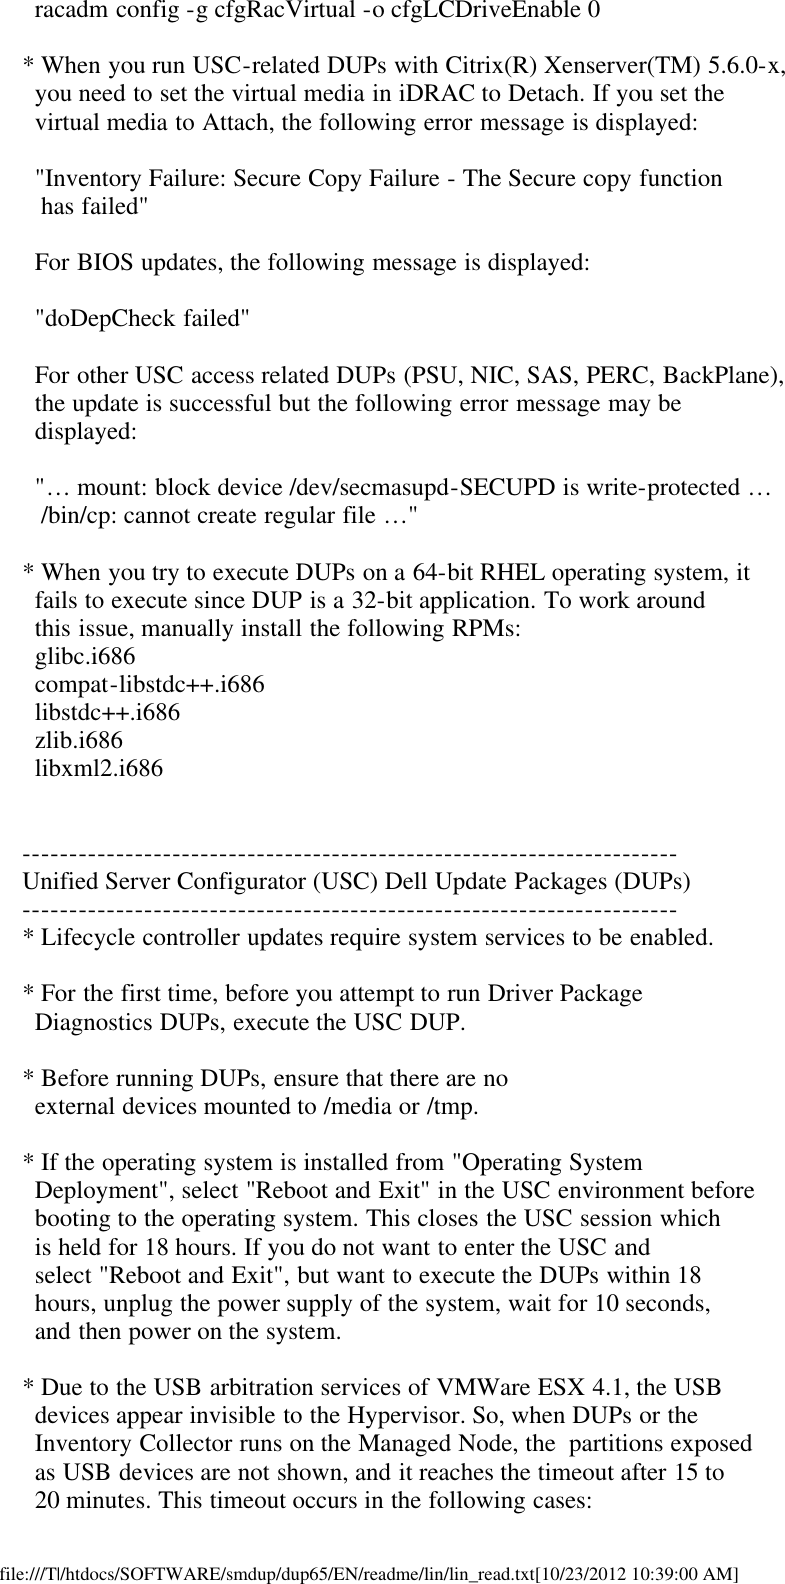 Dell Update Packages Version 6 5 Owners Manual 6.5 Readme For Linux